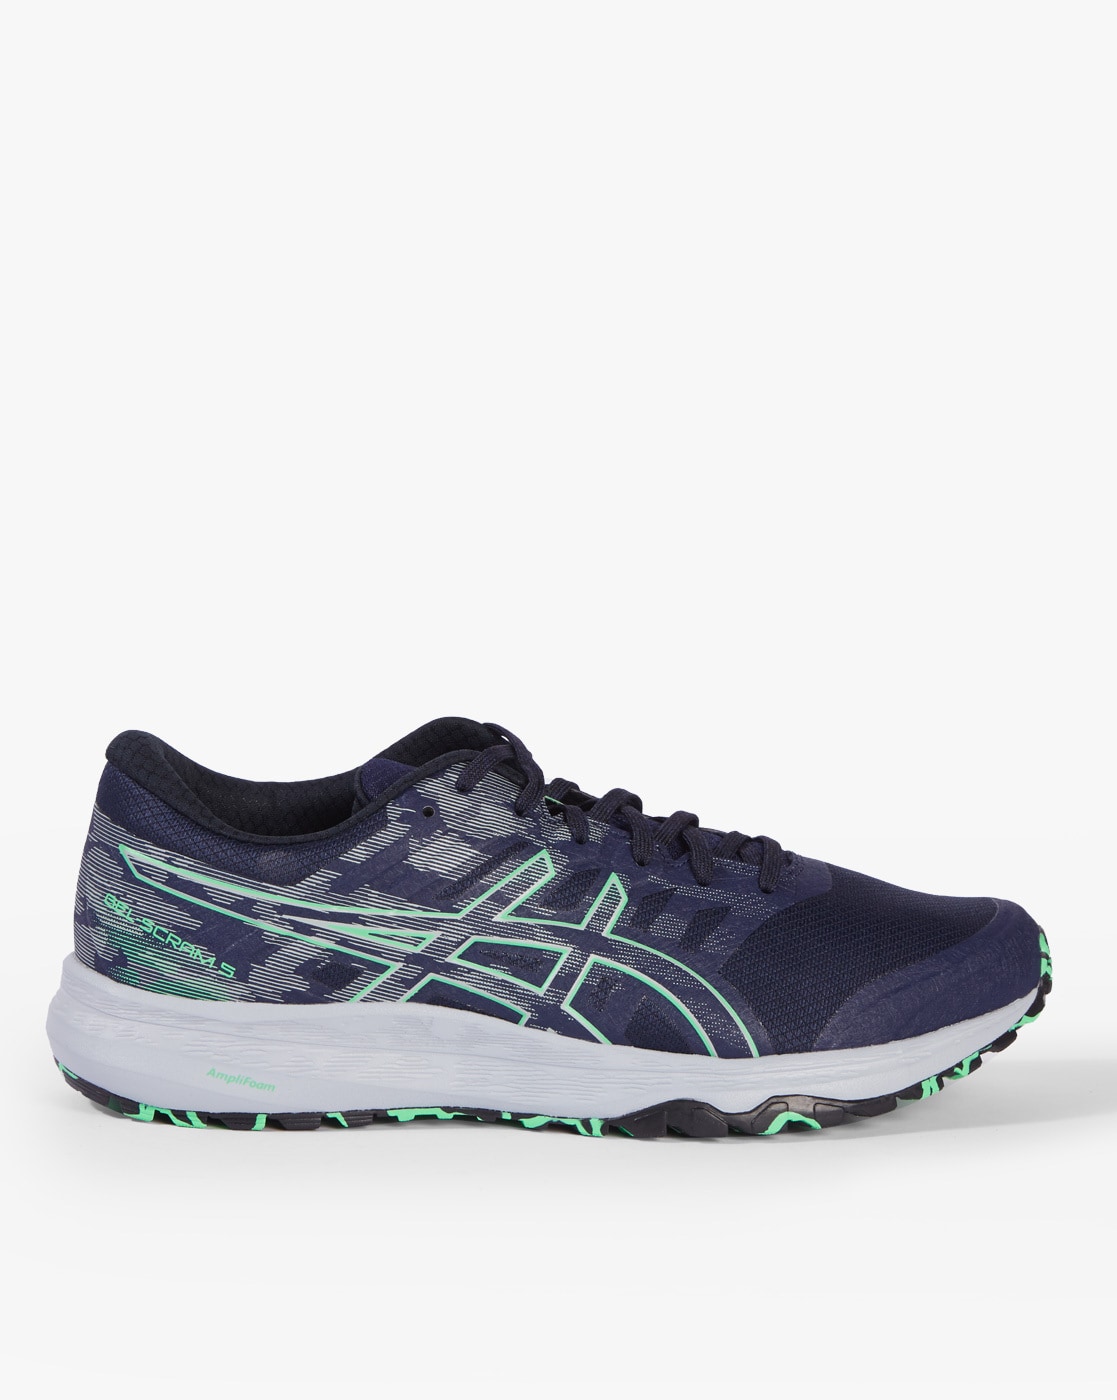 asics printed shoes